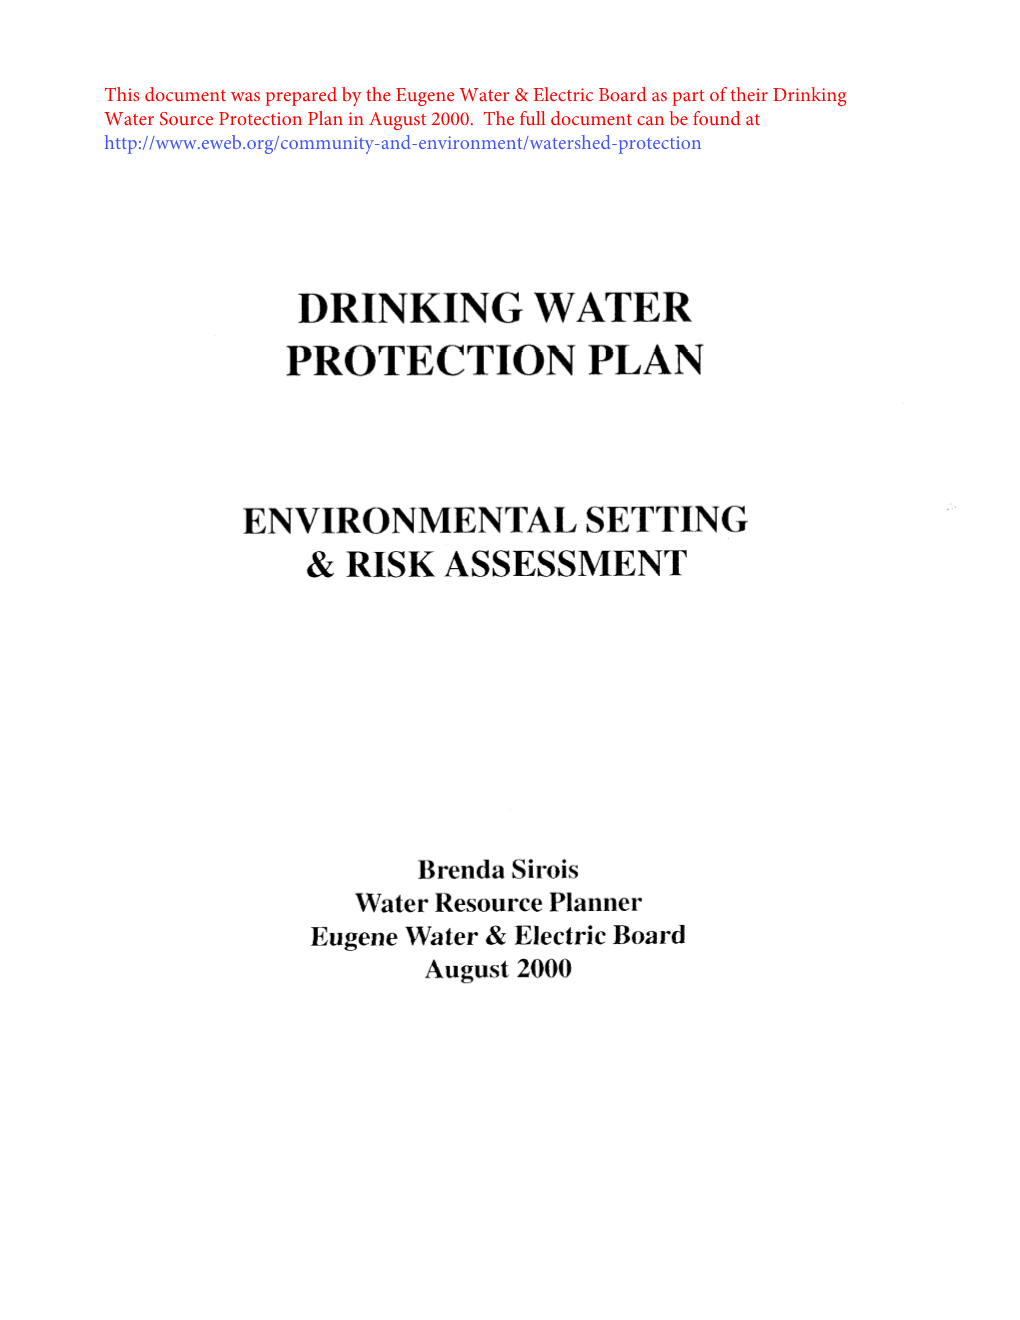 This Document Was Prepared by the Eugene Water & Electric Board As Part of Their Drinking